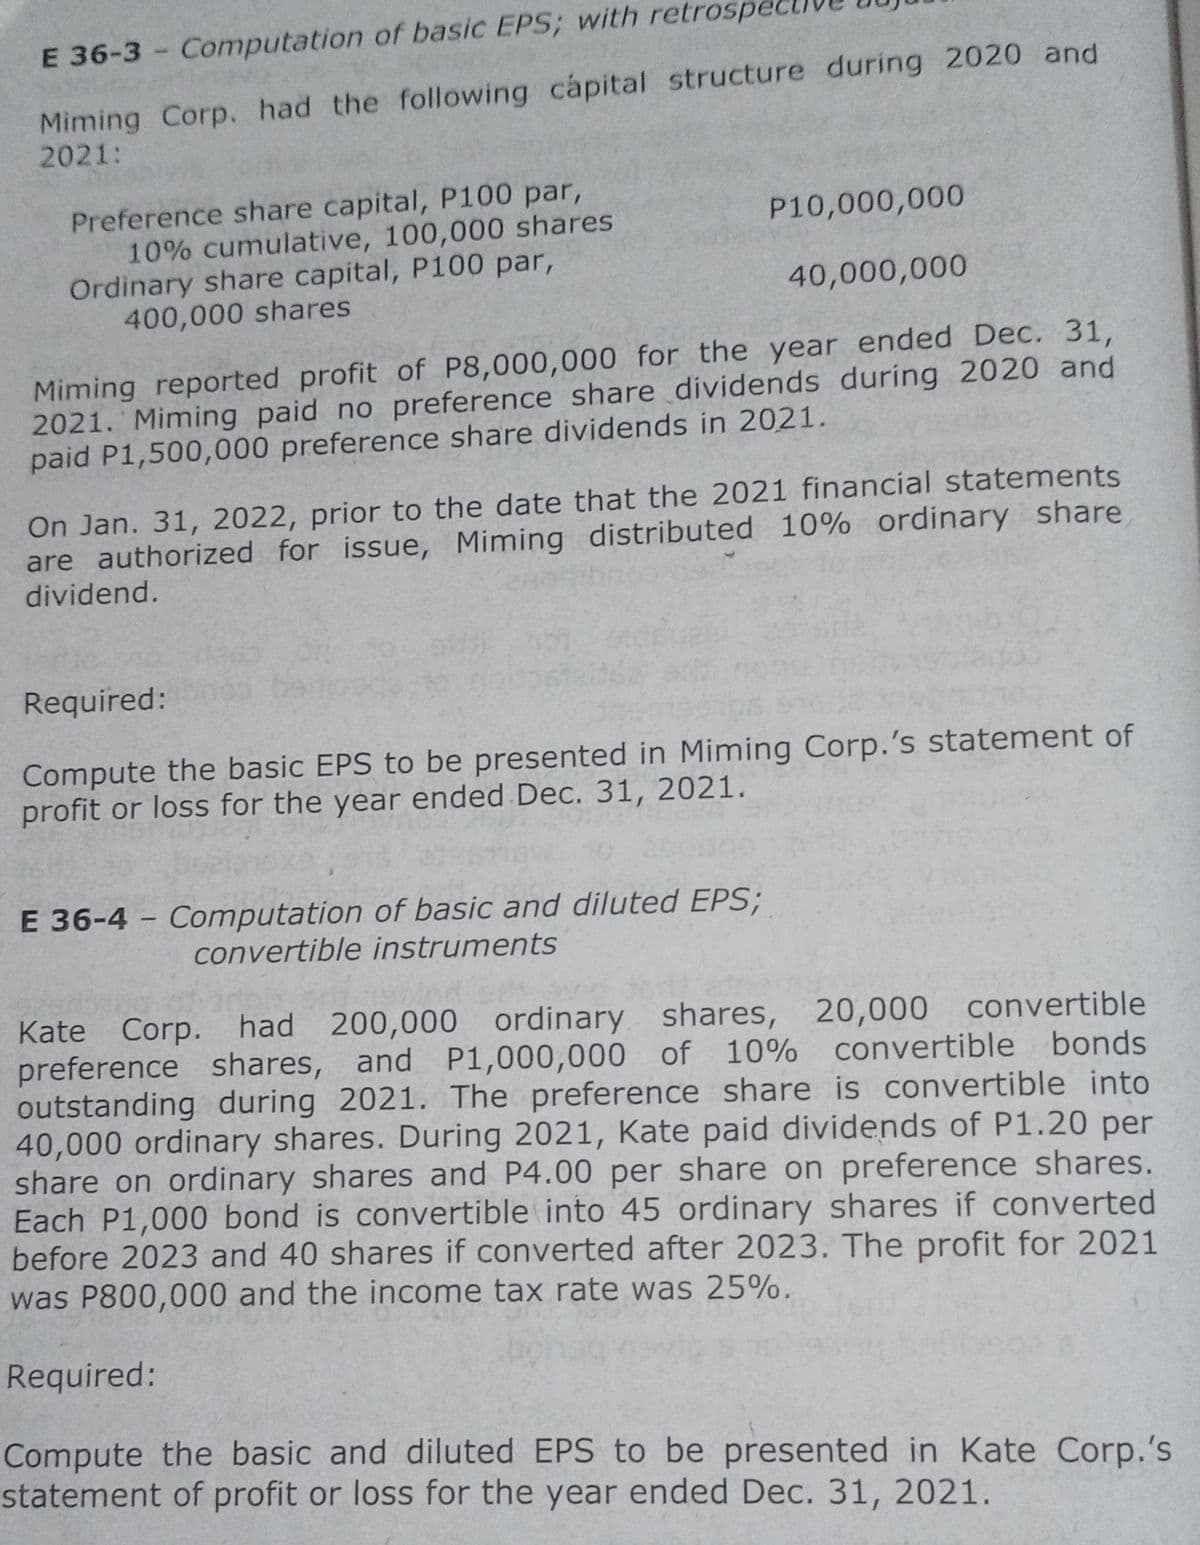 E 36-3 - Computation of basic EPS; with retrospe
Miming Corp. had the following capital structure during 2020 and
2021:
Preference share capital, P100 par,
10% cumulative, 100,000 shares
Ordinary share capital, P100 par,
400,000 shares
P10,000,000
40,000,000
Miming reported profit of P8,000,000 for the year ended Dec. 31,
2021. Miming paid no preference share dividends during 2020 and
paid P1,500,000 preference share dividends in 2021.
On Jan. 31, 2022, prior to the date that the 2021 financial statements
are authorized for issue, Miming distributed 10% ordinary share
dividend.
Required:
Compute the basic EPS to be presented in Miming Corp.'s statement of
profit or loss for the year ended Dec. 31, 2021.
E 36-4 - Computation of basic and diluted EPS;
convertible instruments
Kate Corp. had 200,000 ordinary shares, 20,000 convertible
preference shares, and P1,000,000 of
outstanding during 2021. The preference share is convertible into
40,000 ordinary shares. During 2021, Kate paid dividends of P1.20 per
share on ordinary shares and P4.00 per share on preference shares.
Each P1,000 bond is convertible into 45 ordinary shares if converted
before 2023 and 40 shares if converted after 2023. The profit for 2021
was P800,000 and the income tax rate was 25%.
10% convertible bonds
Required:
Compute the basic and diluted EPS to be presented in Kate Corp.'s
statement of profit or loss for the year ended Dec. 31, 2021.
